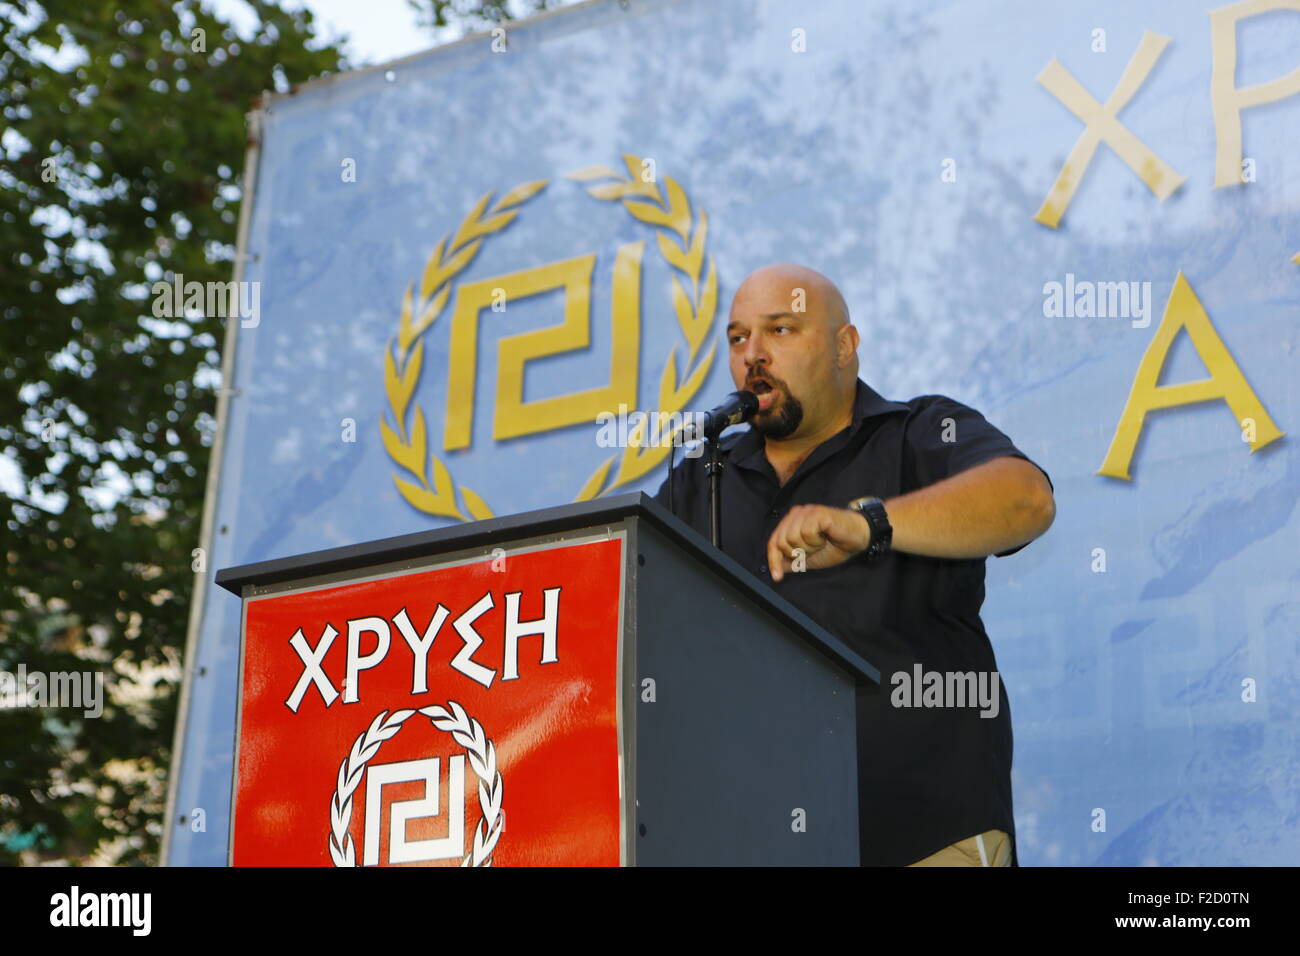 Athens, Greece. 16th September 2015. Golden Dawn MP (Member of Parliament) Ilias Panagiotaros addresses the election rally. Greek right wing  party Golden Dawn held an election rally in Athens, four days ahead of election day. The party hopes to gain enough seats in the election to become the third latest party in the Greek Parliament. Credit:  Michael Debets/Alamy Live News Stock Photo